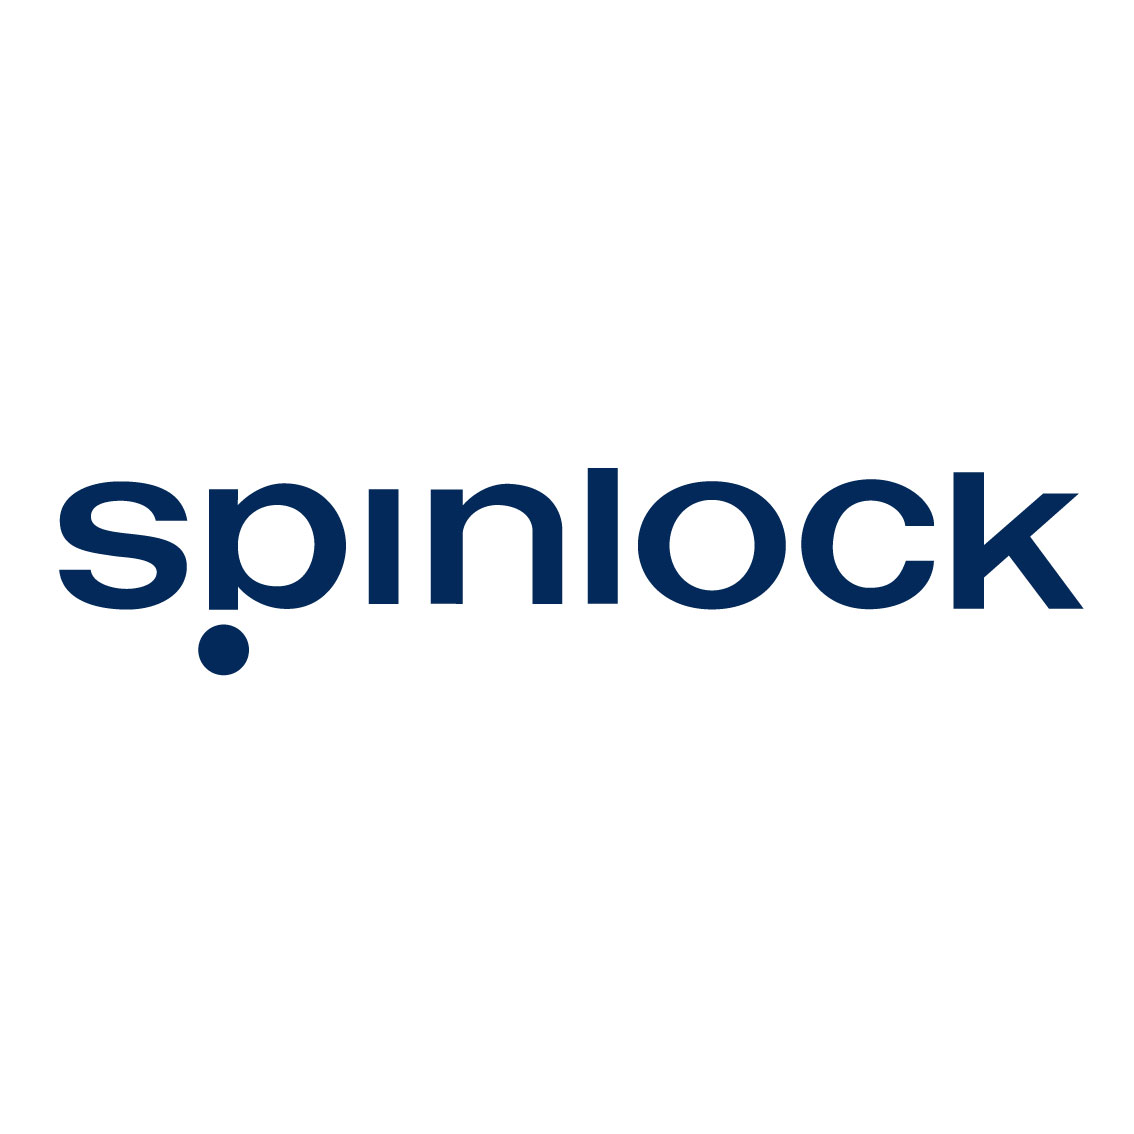 Spinlock Partner of the Yacht Racing Forum